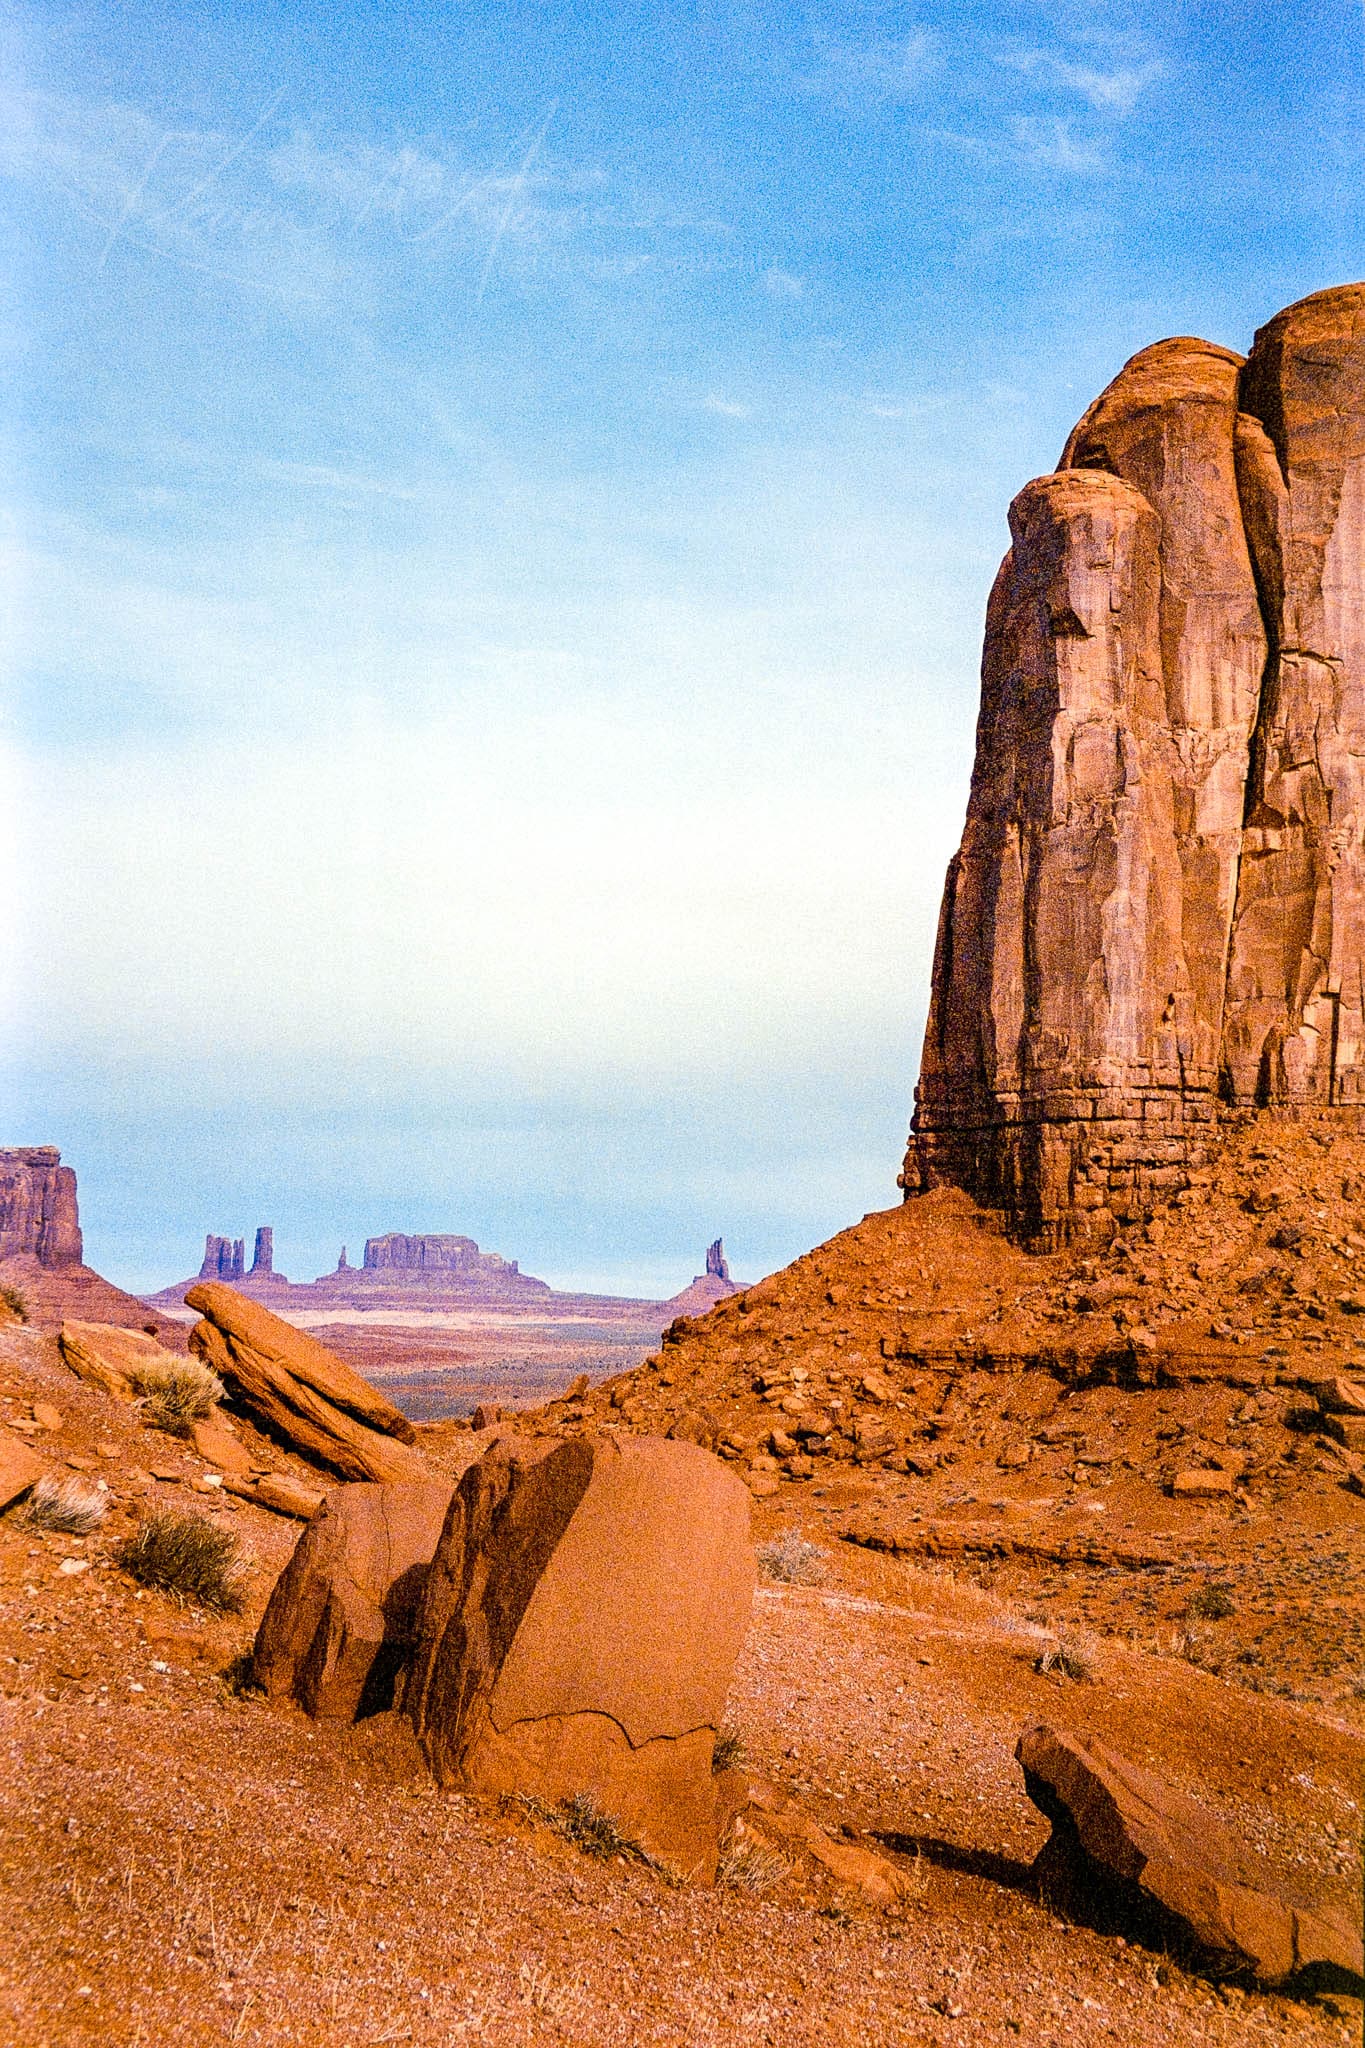 Stunning desert landscape with towering red rock formations under a vibrant blue sky.